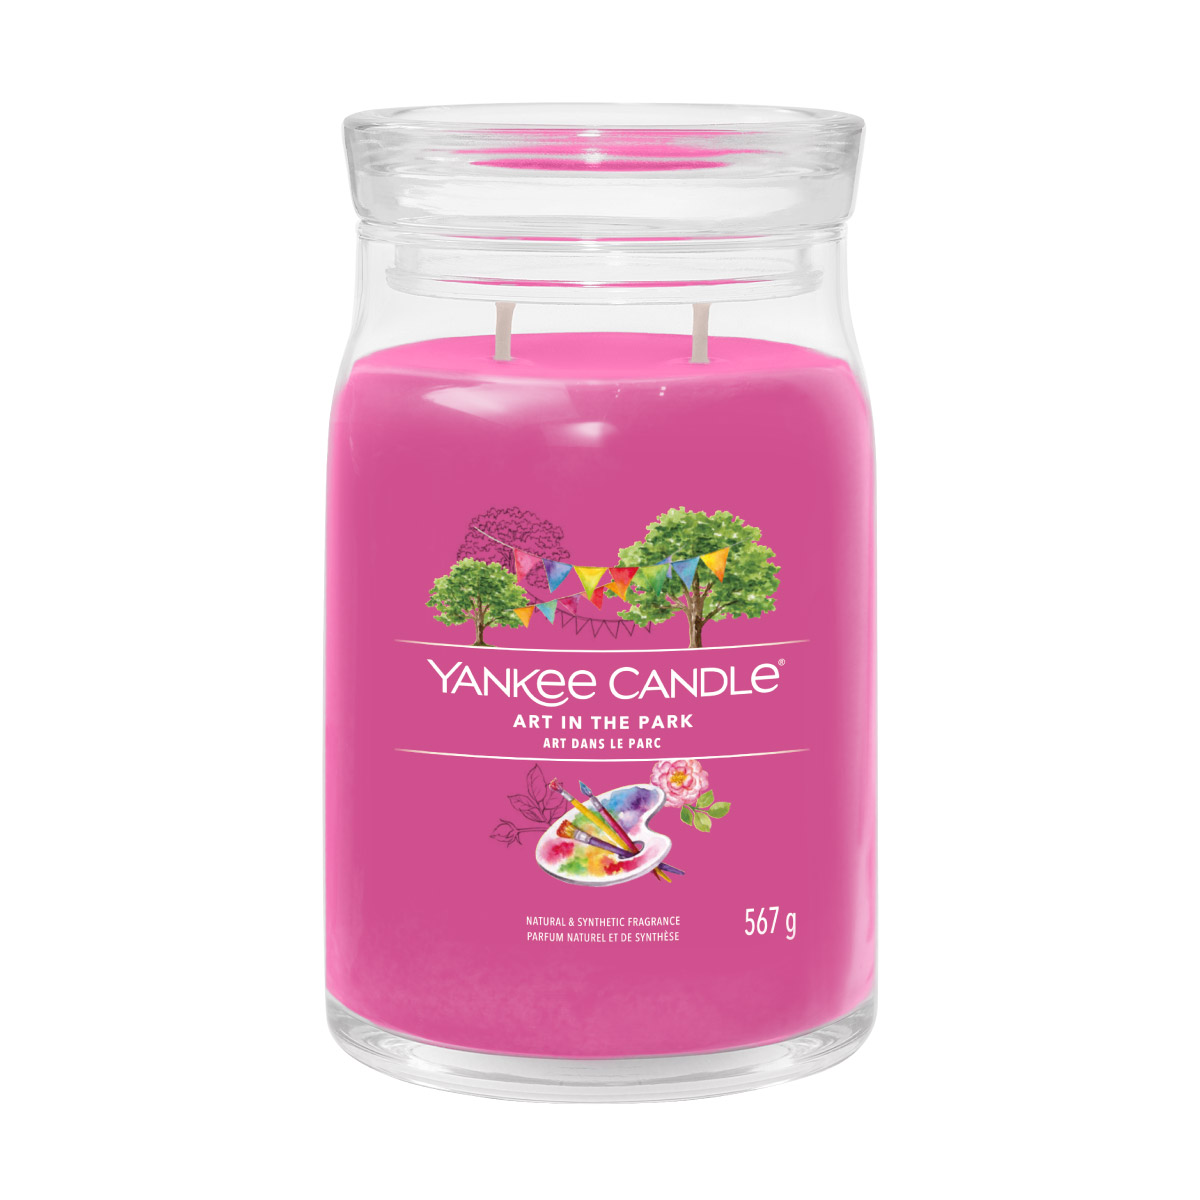 Art in the Park - Signature Duftkerze im Glas 567g - Yankee Candle®